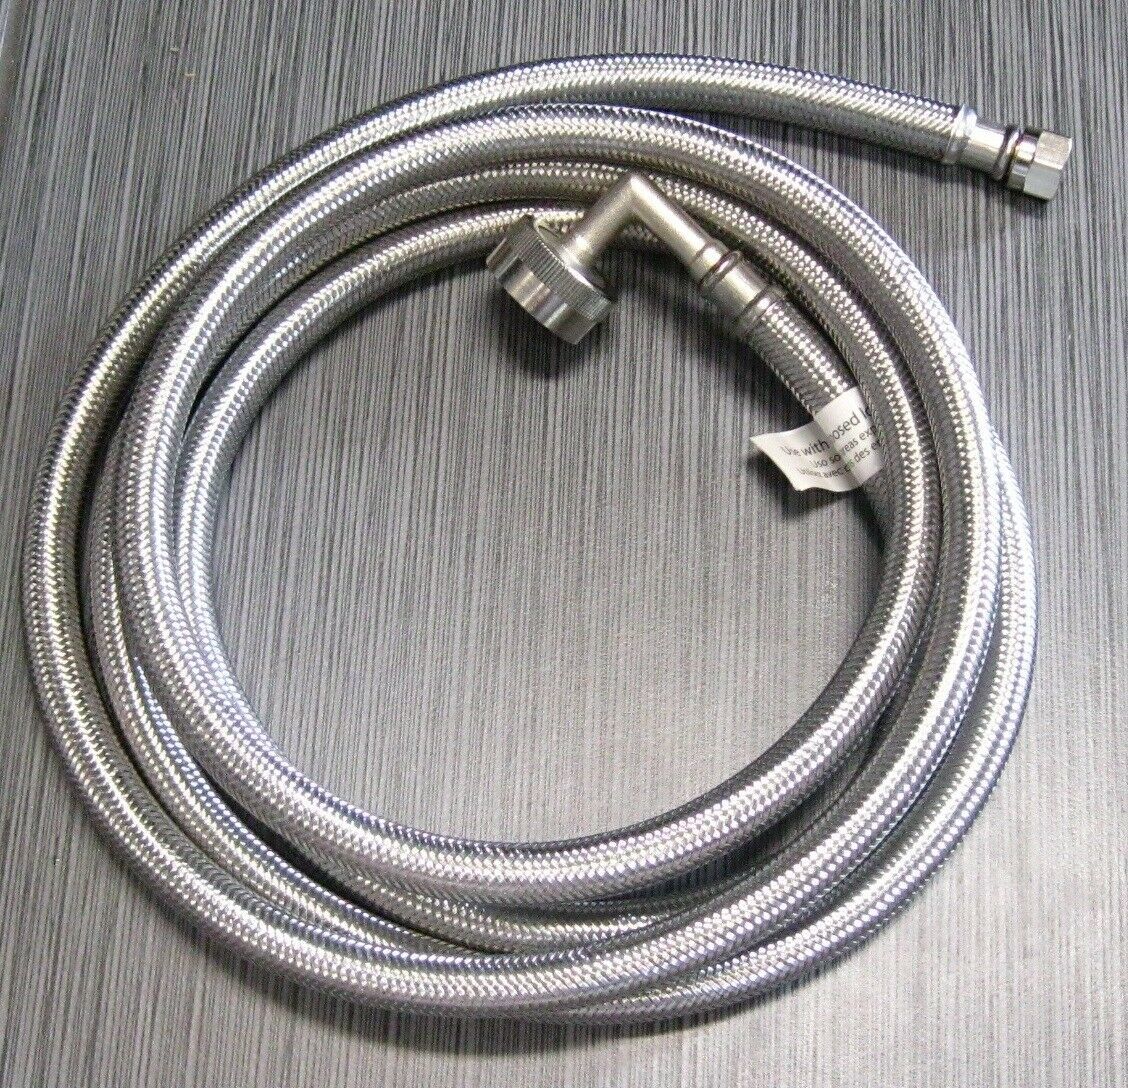 EASTMAN 8-ft 3/8" Compression Inlet 3/4" Hose Thread Outlet Braided Stainless - $14.99